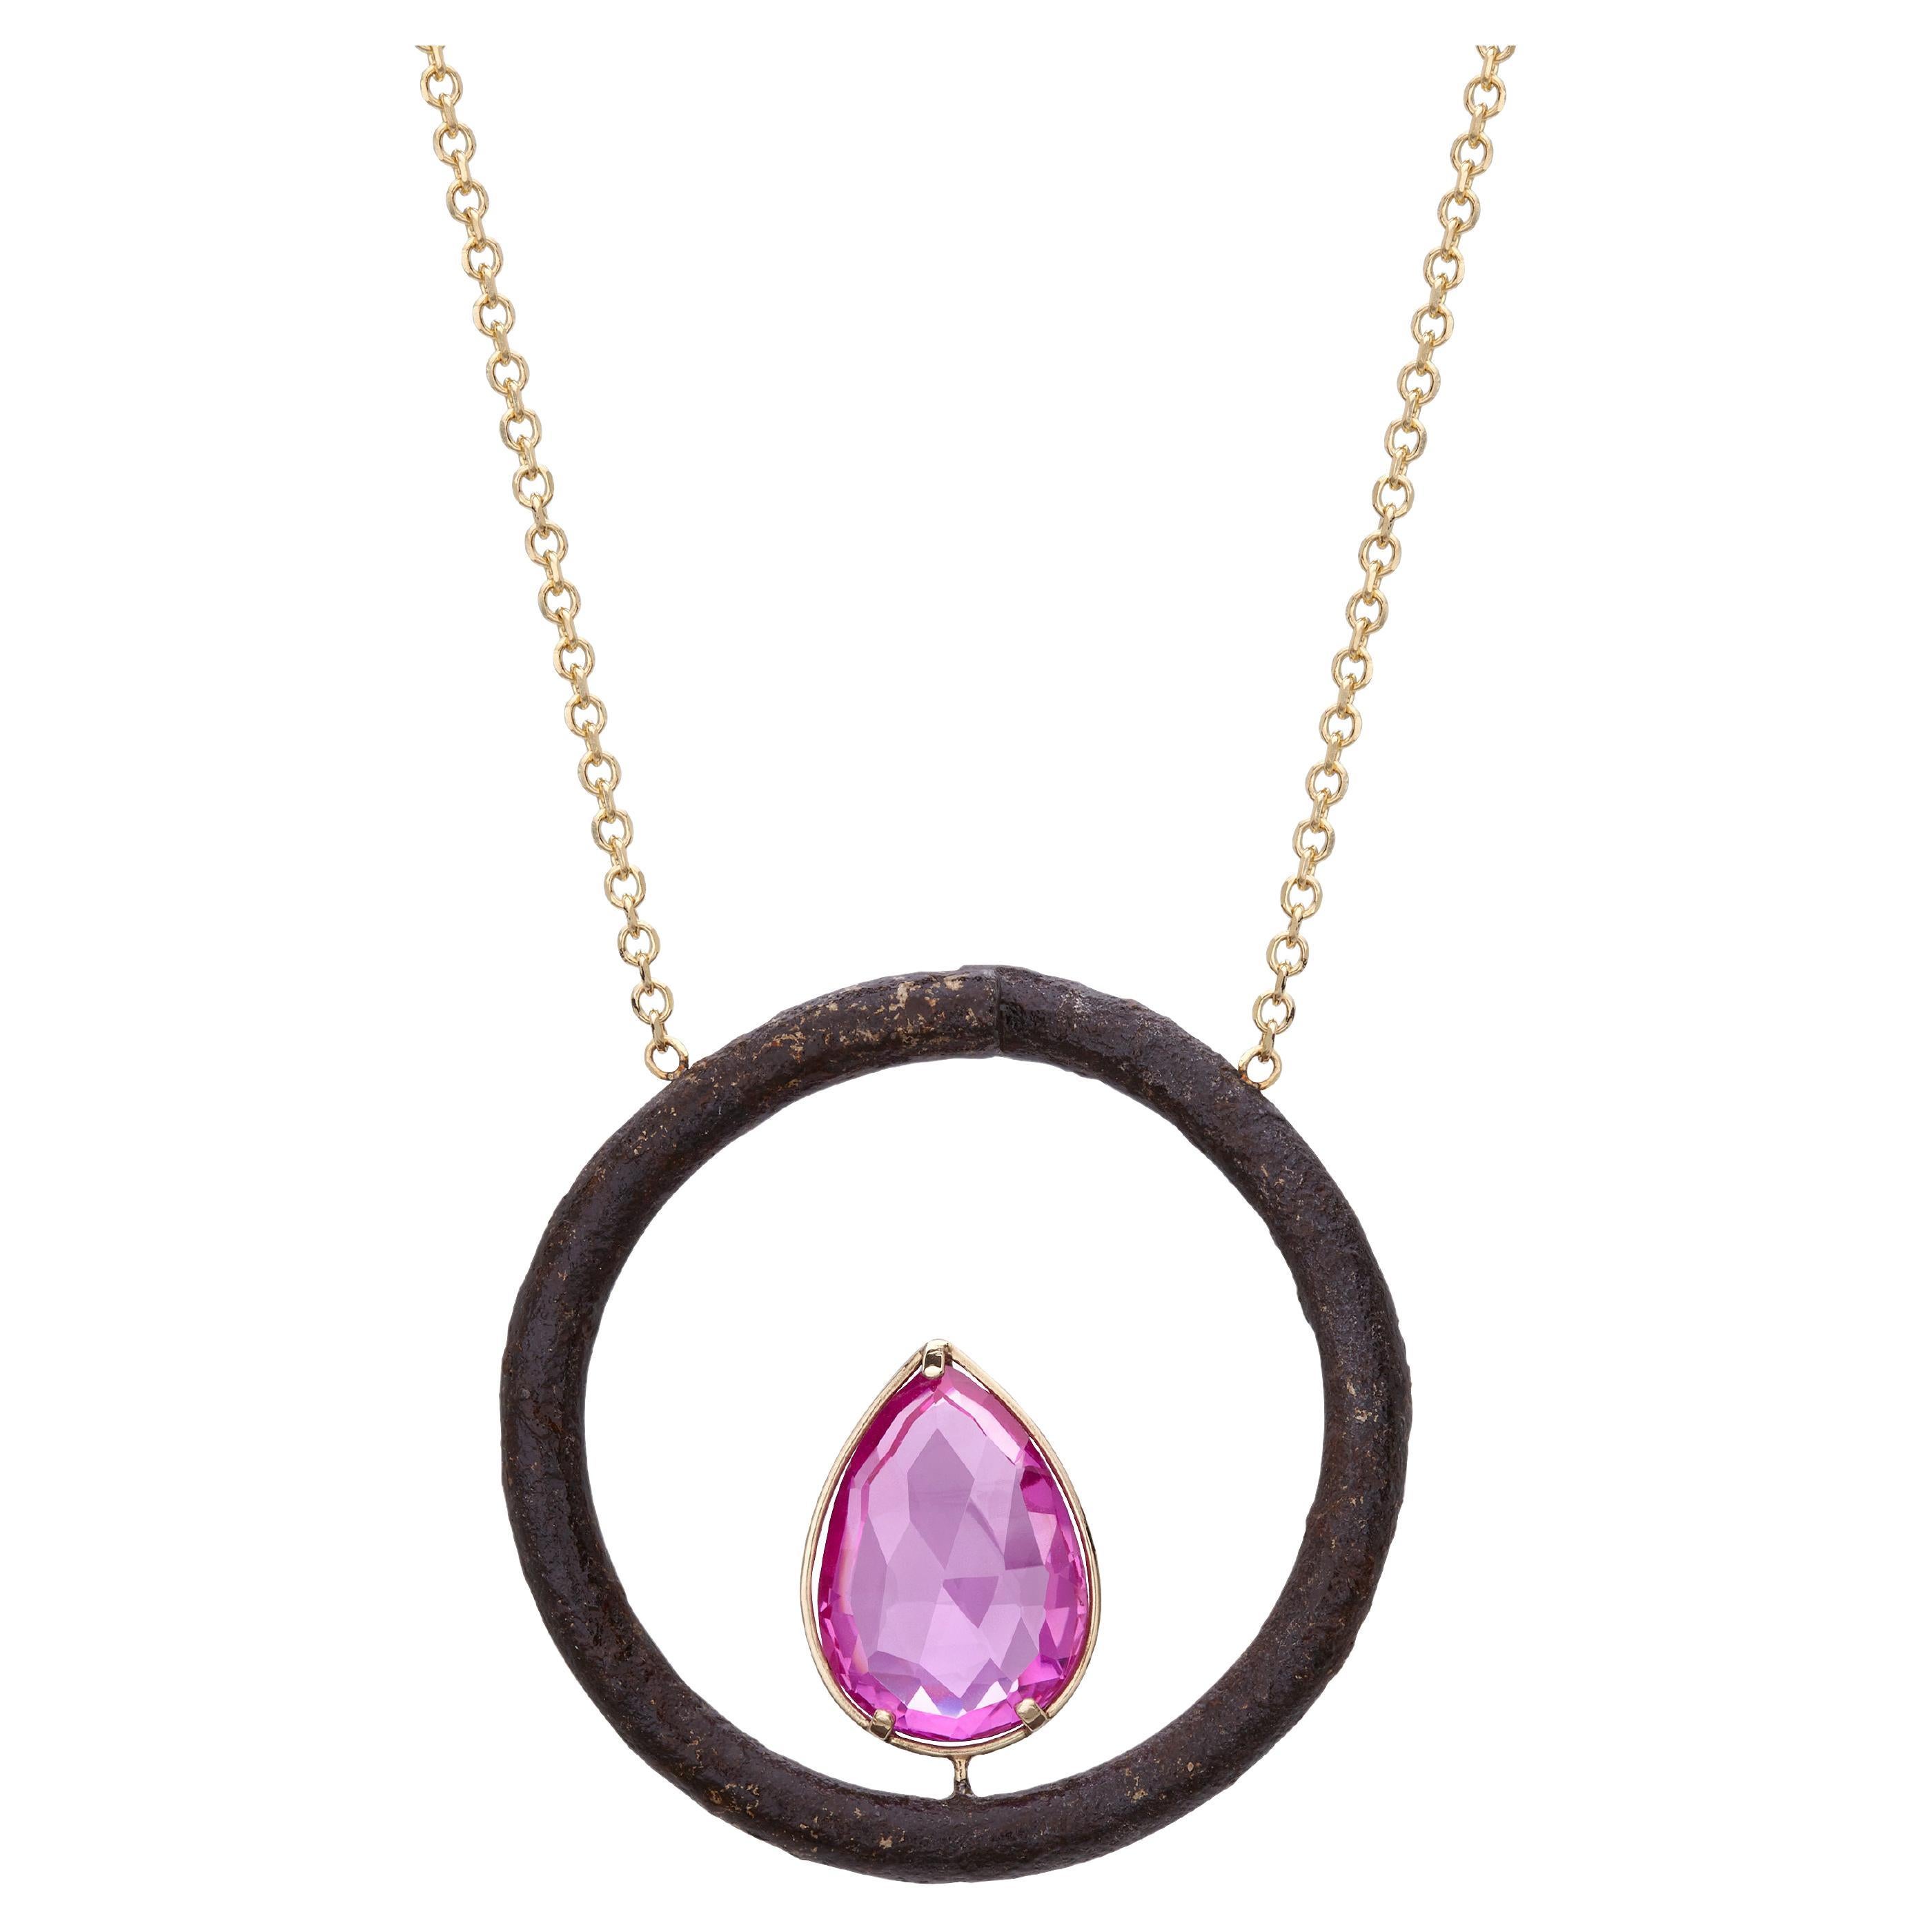 Karnayio Round Rusty Object Artistic Pendant in 9Kt Yellow Gold with Pink Spinel For Sale